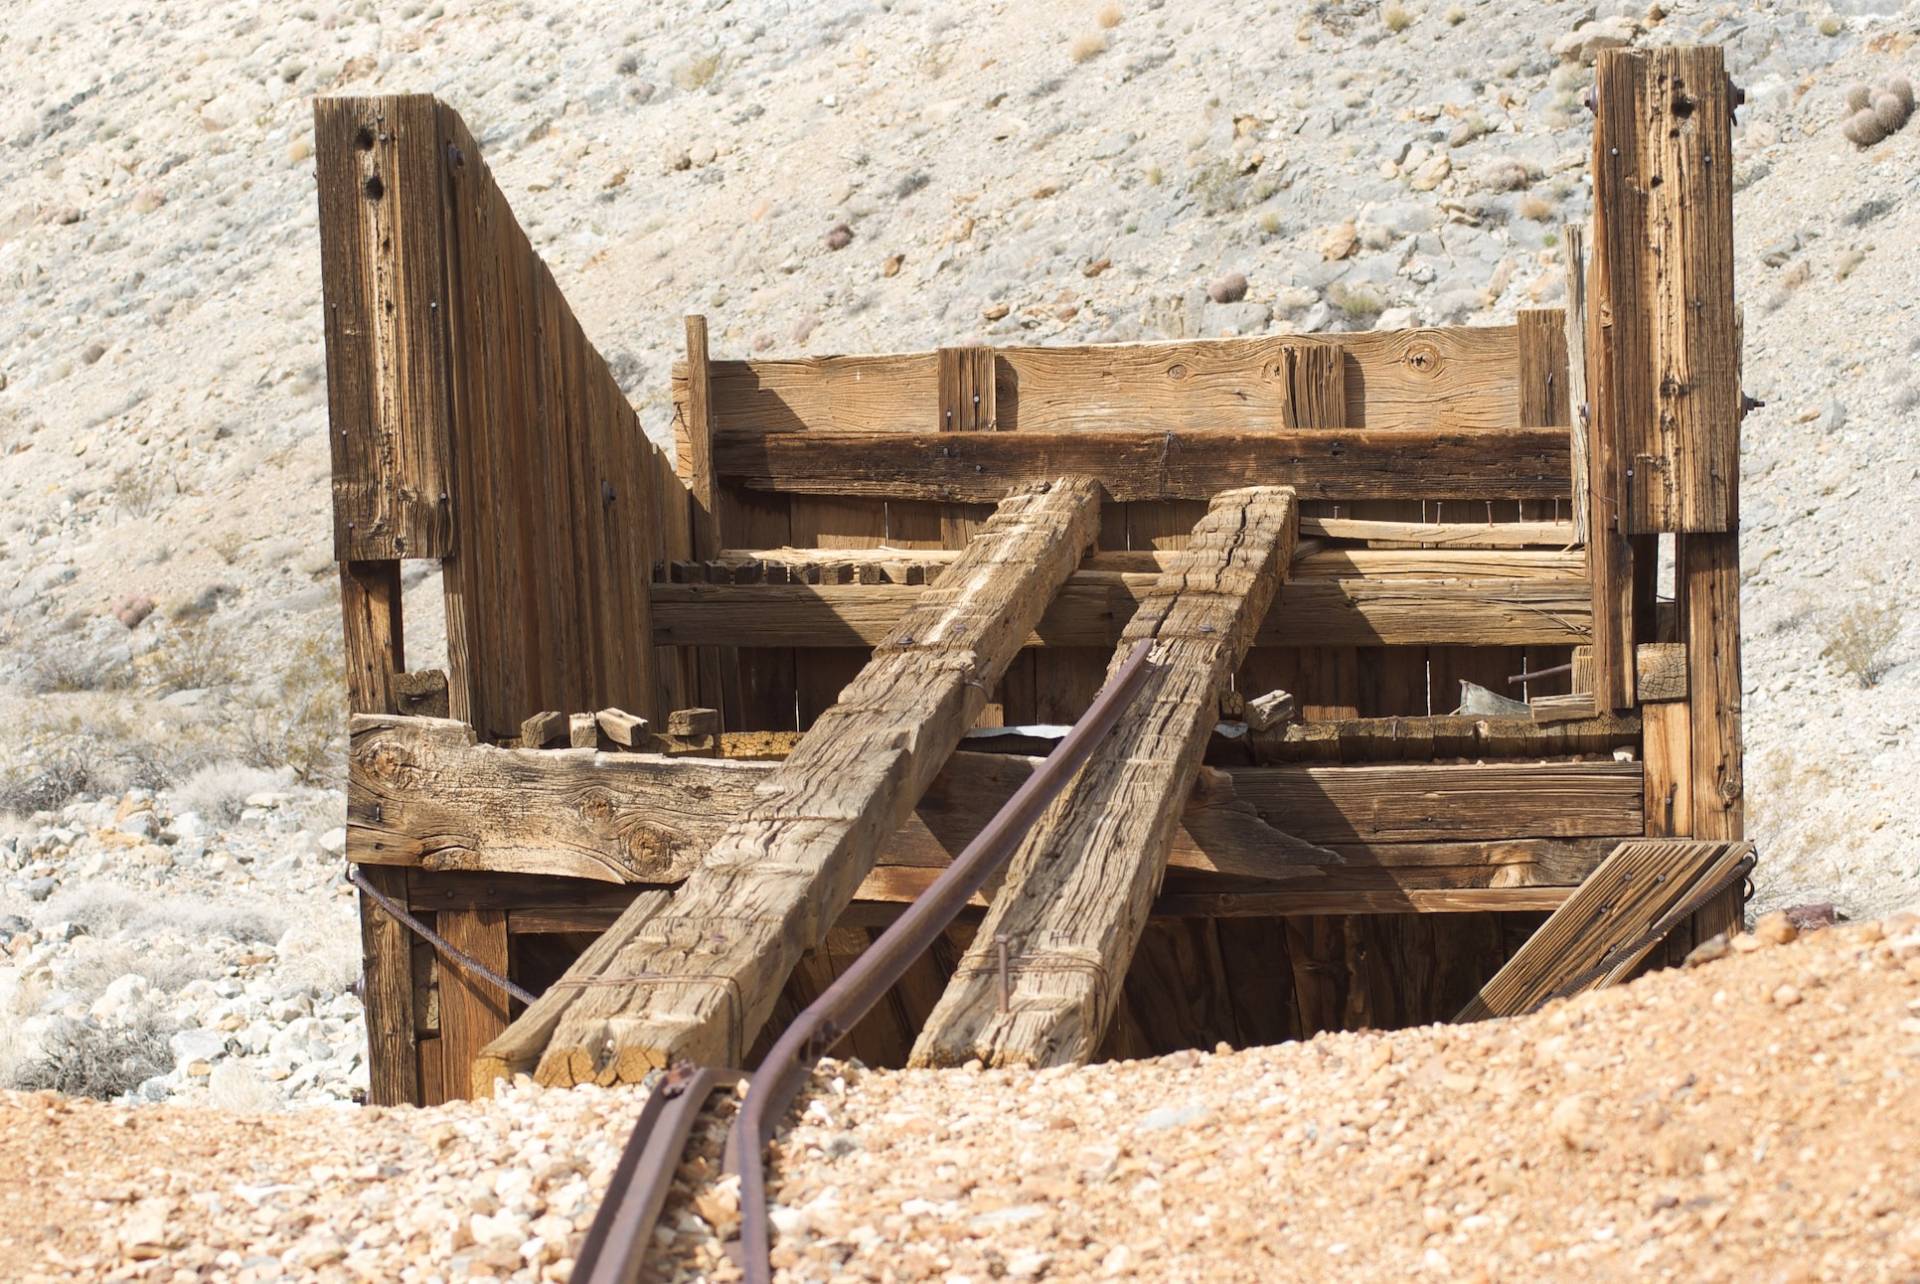 Ore bin at the Ubehebe Lead Mine, Death Valley National Park, California